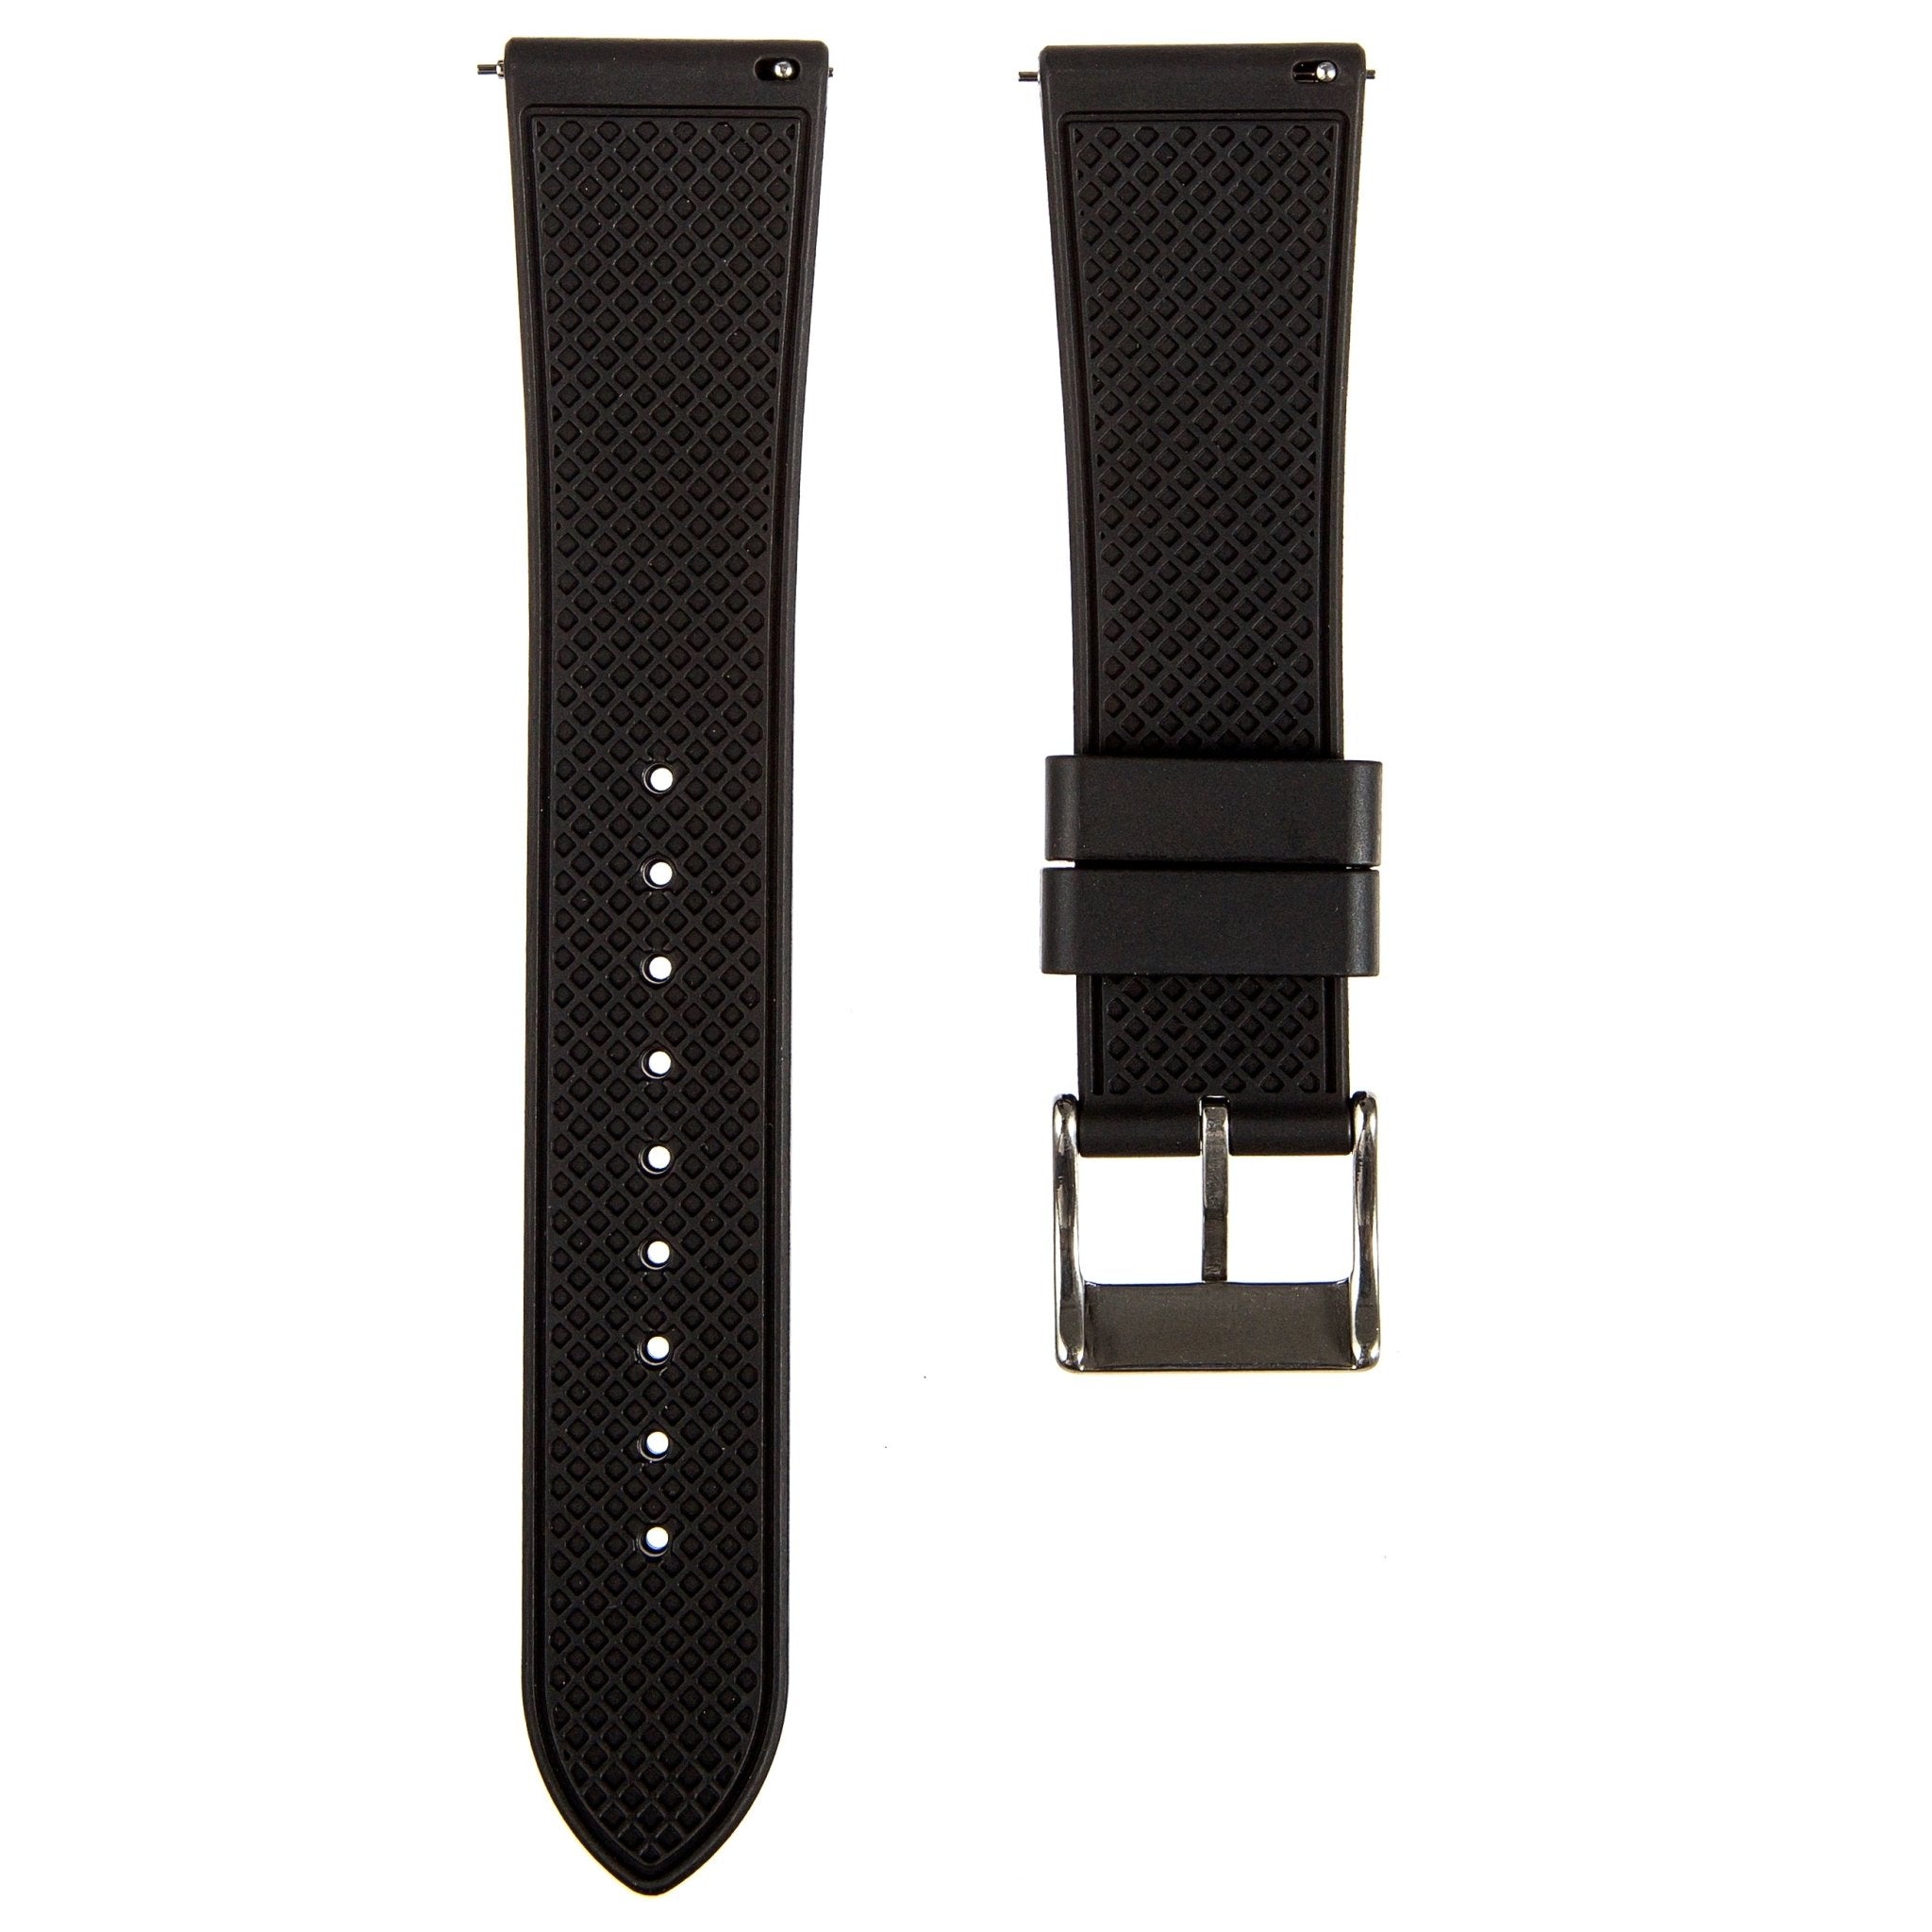 Grid FKM Rubber Strap - Quick-Release – Compatible with Blancpain x Swatch - Black (2412) -StrapSeeker